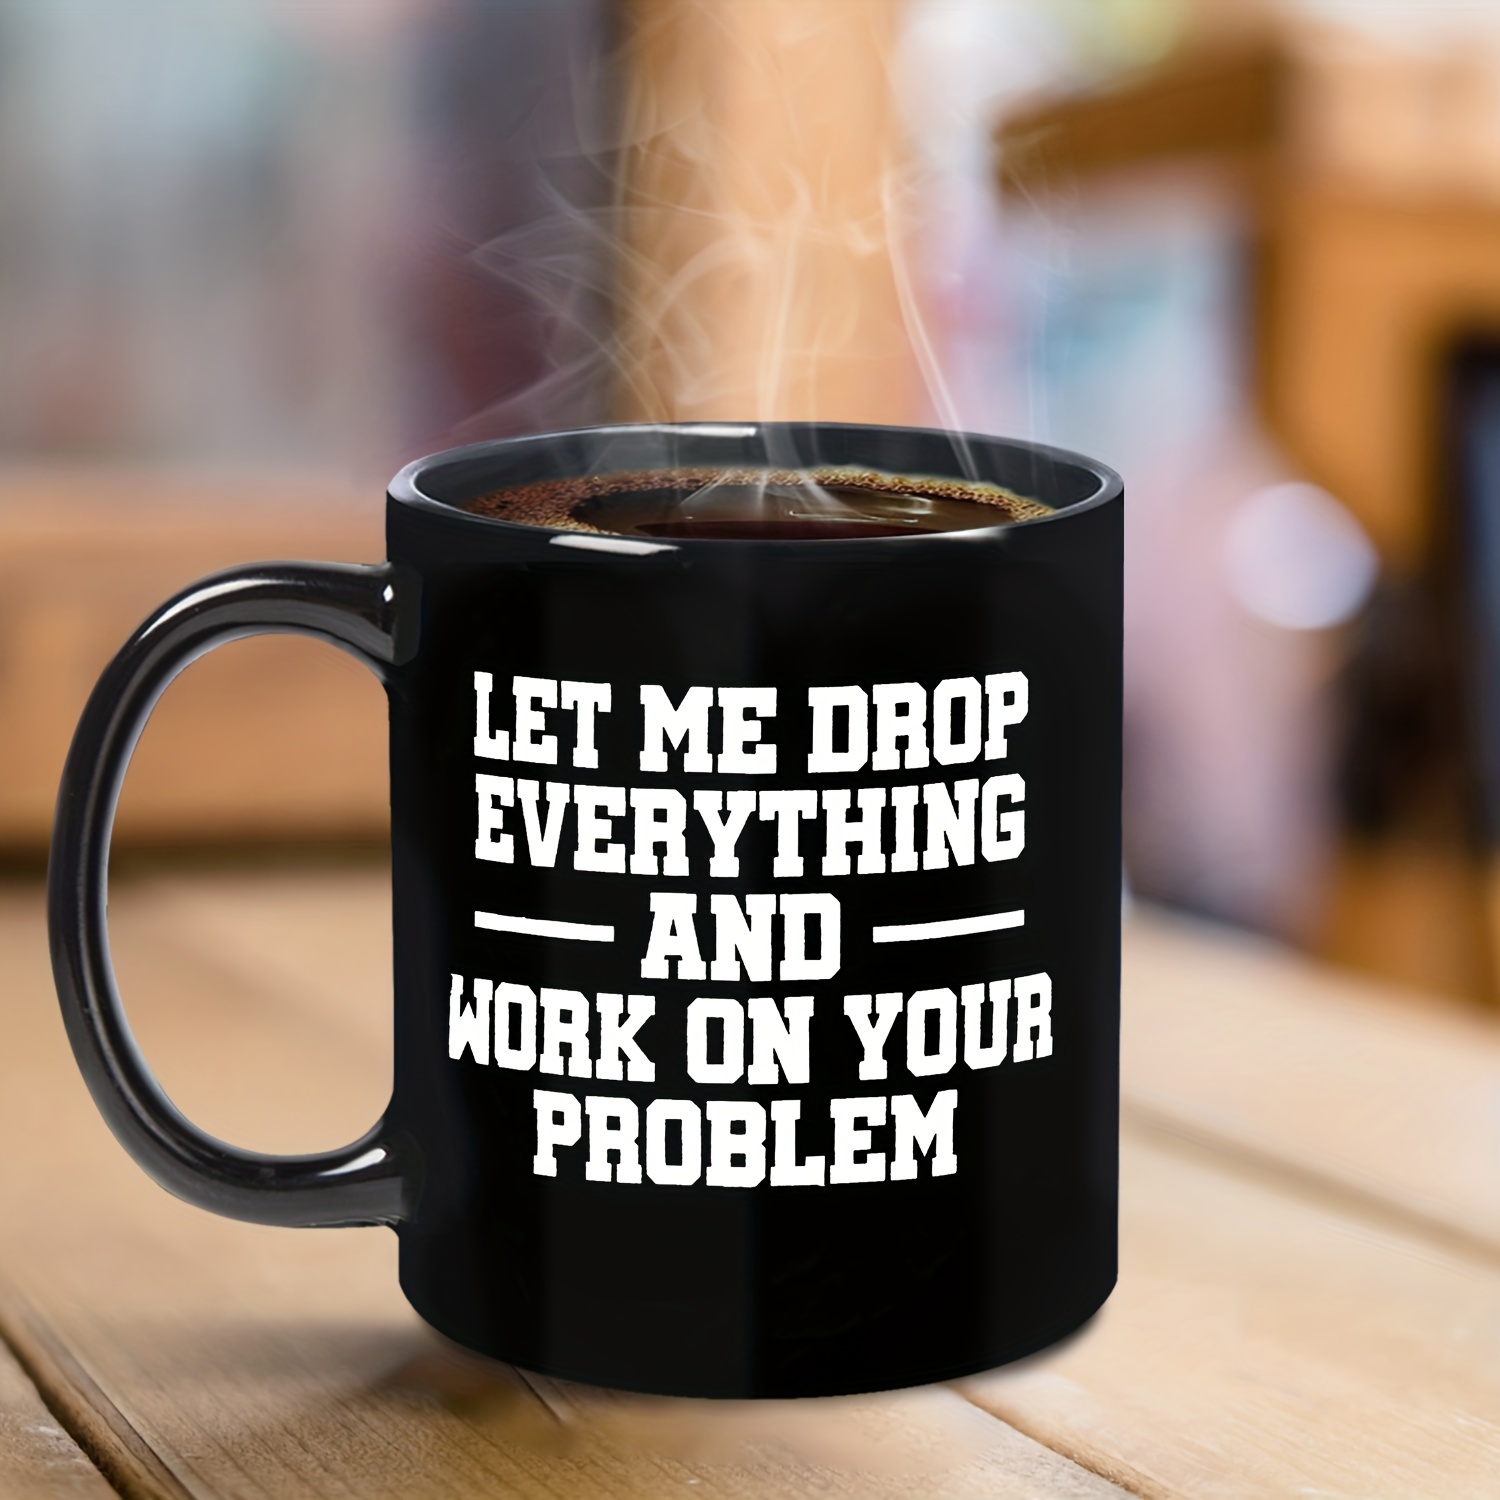 Gifts for People who Work from Home Funny Office Mugs Women men - Sarcastic  Novelty Cups - Gift for Coworkers, Boss, Employees - Gag Gift